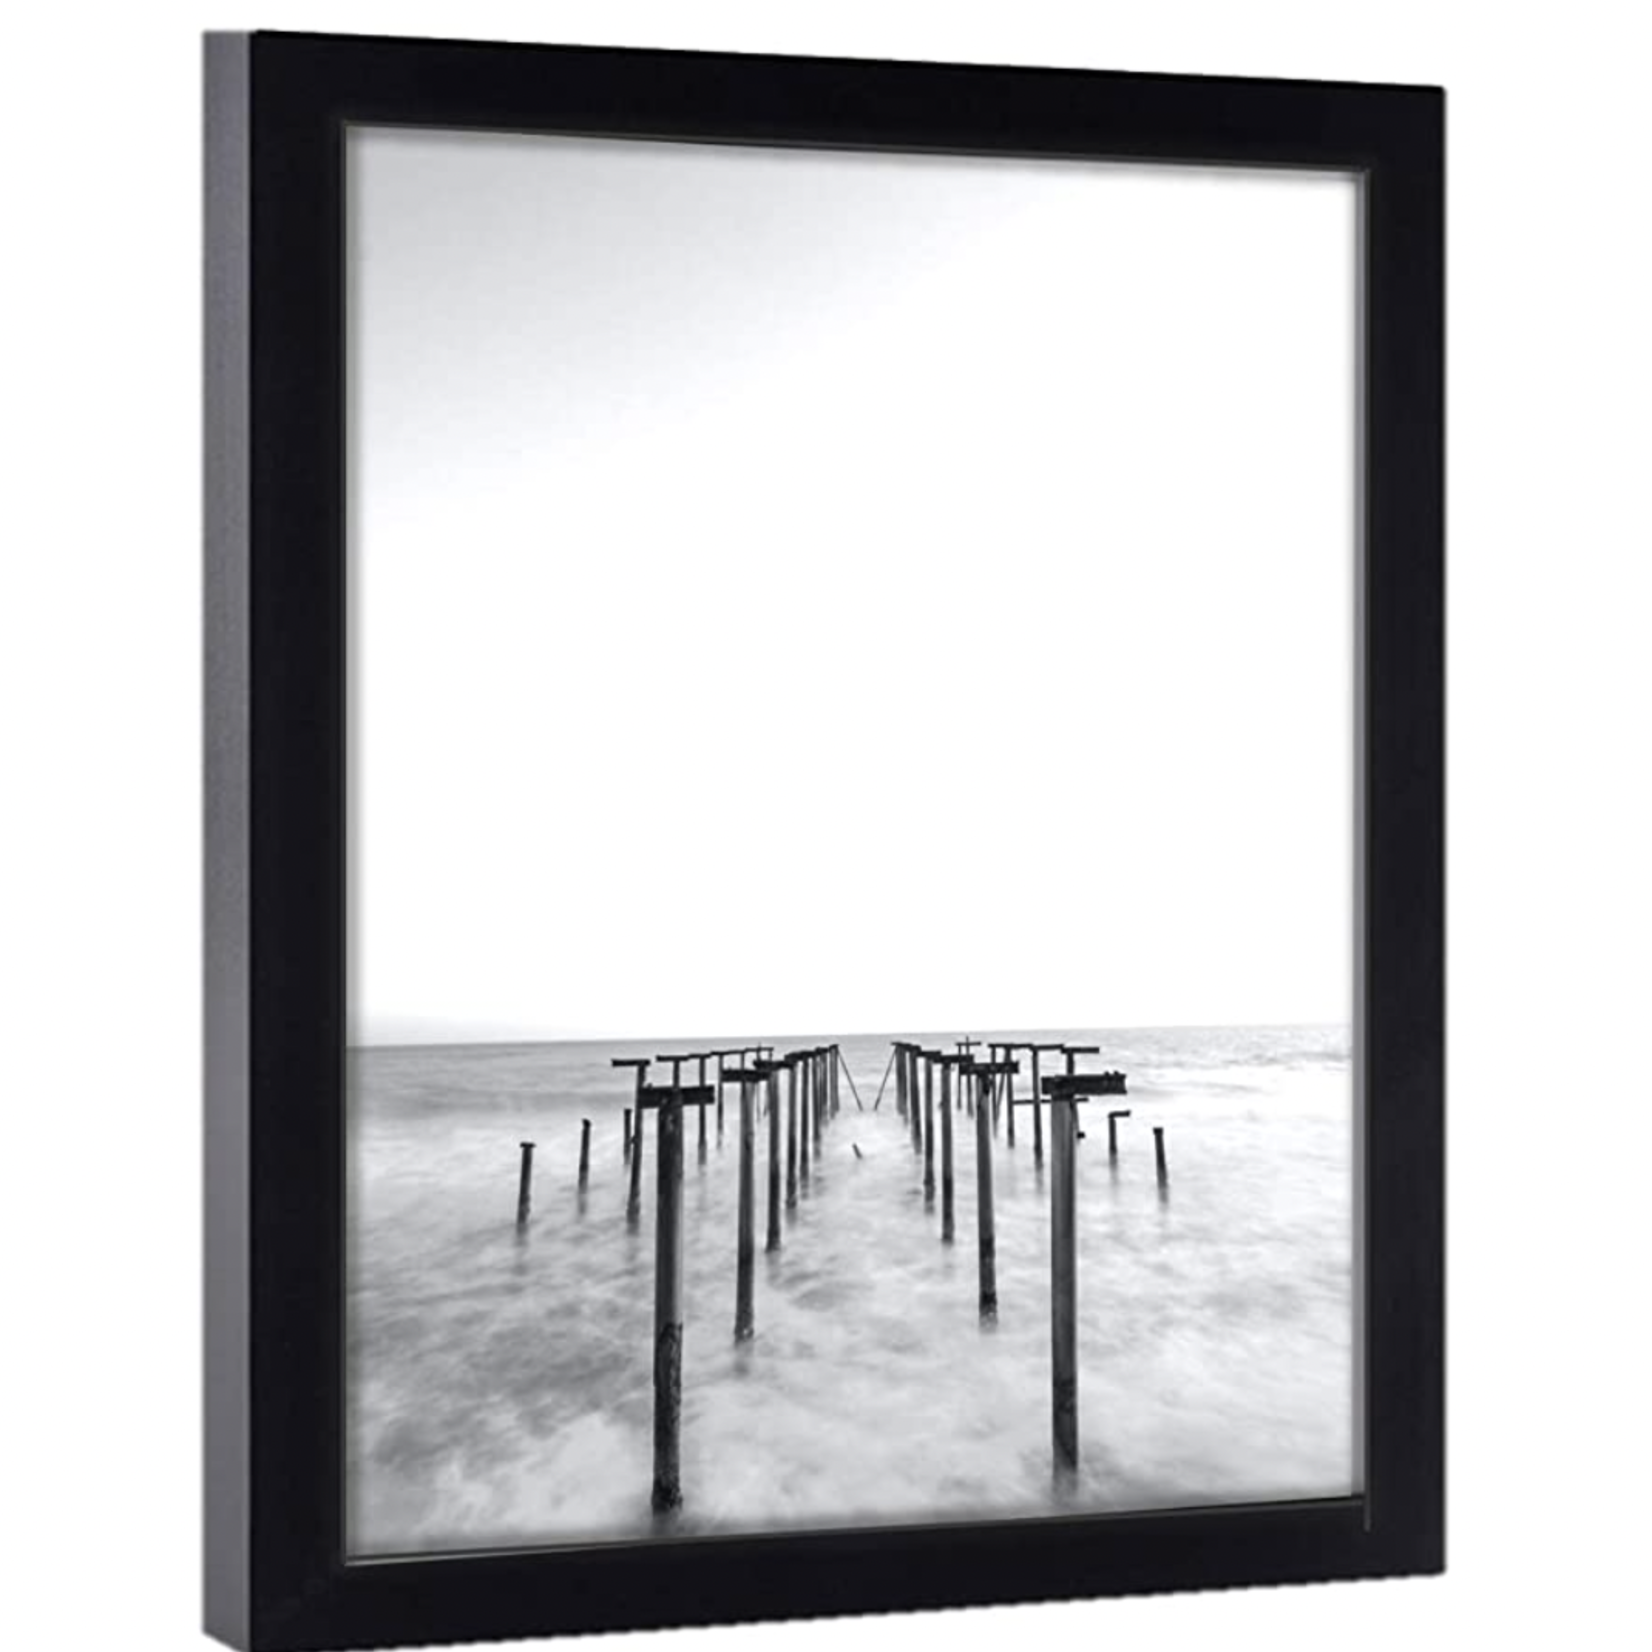 *Solid Wood Picture Frame 11x 14 - Black